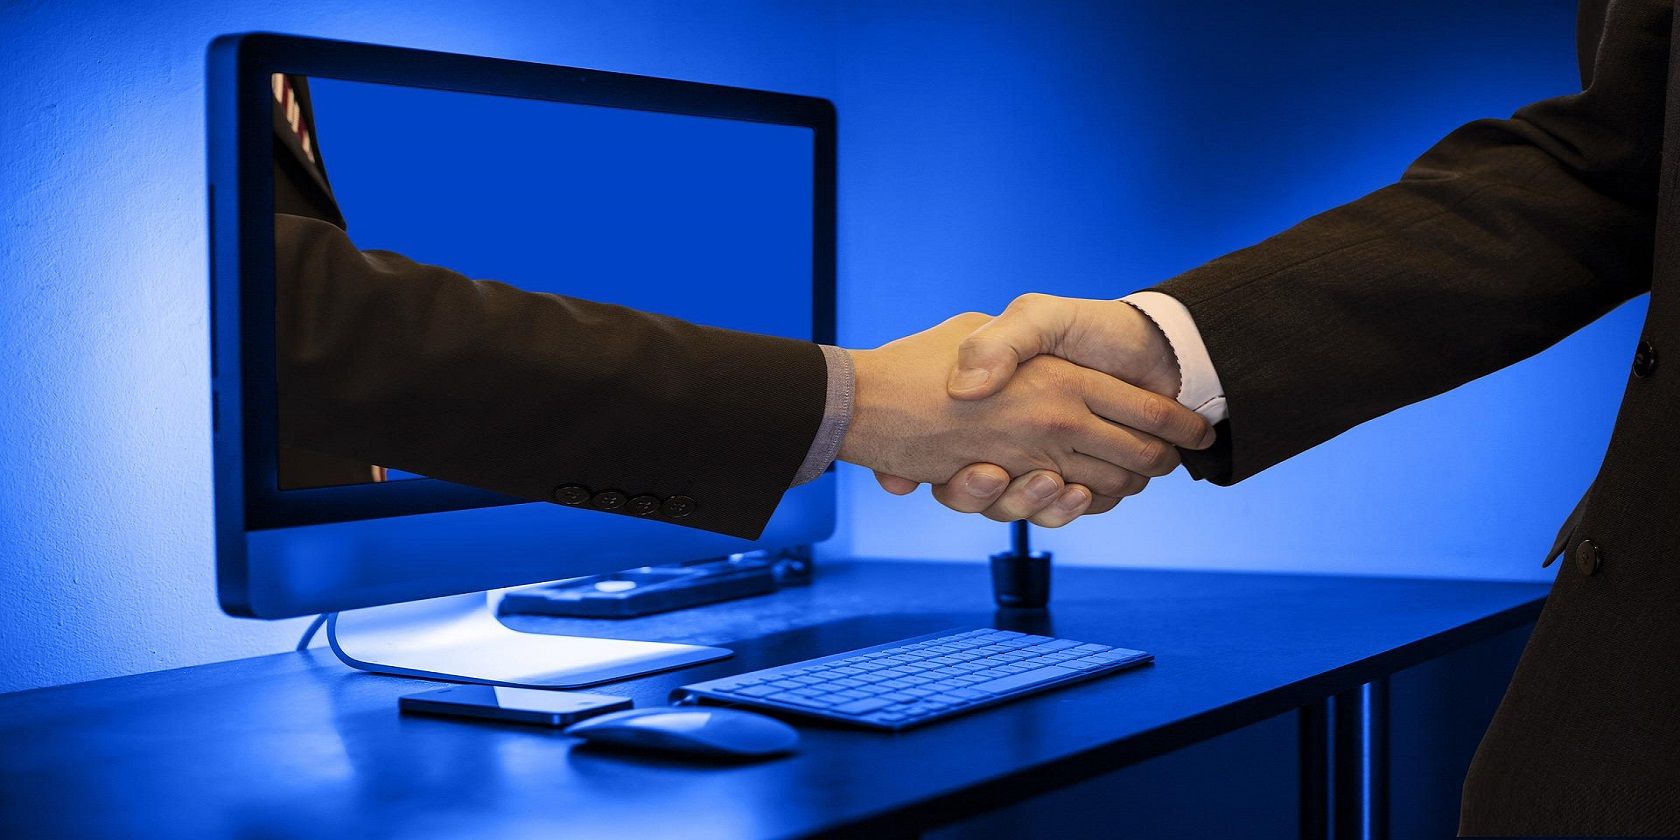 Hand coming out of the computer to shake the hand of the person in front of it.